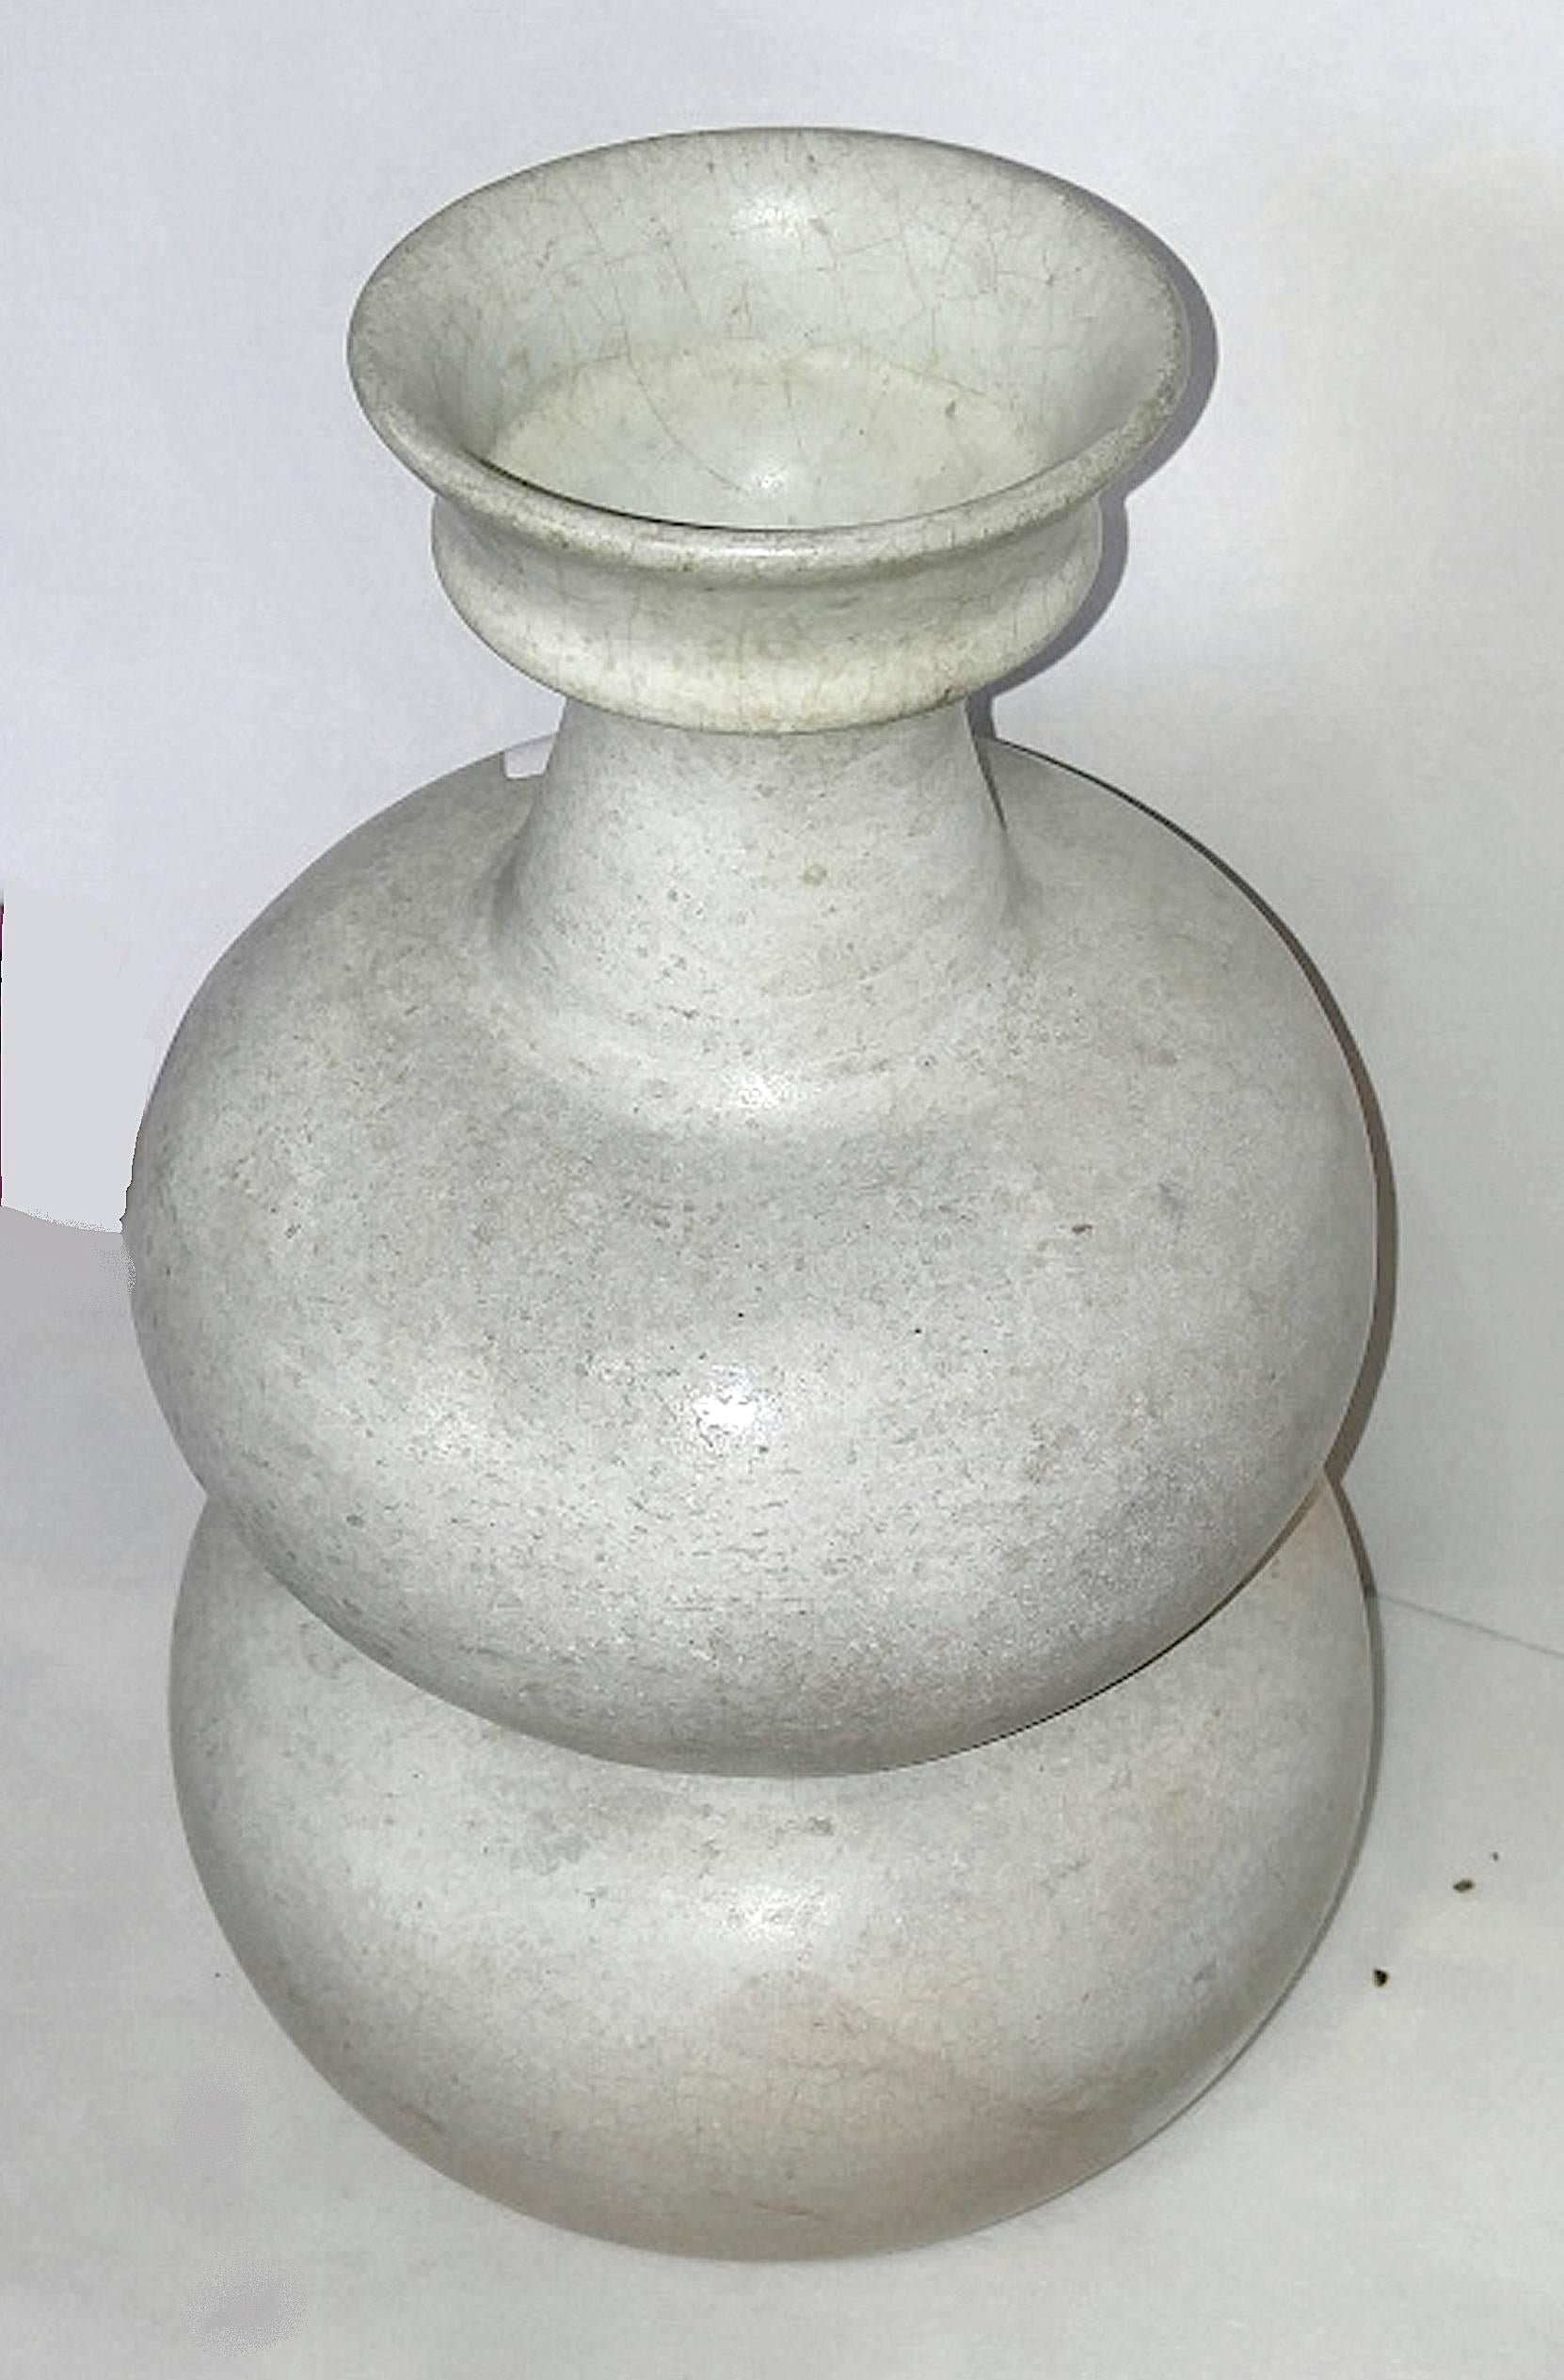 A ceramic vase with white glaze, from Thailand. Fluted neck, double round body, mid-20th century. Excellent vintage condition. Additional similar vases available. Priced separately.